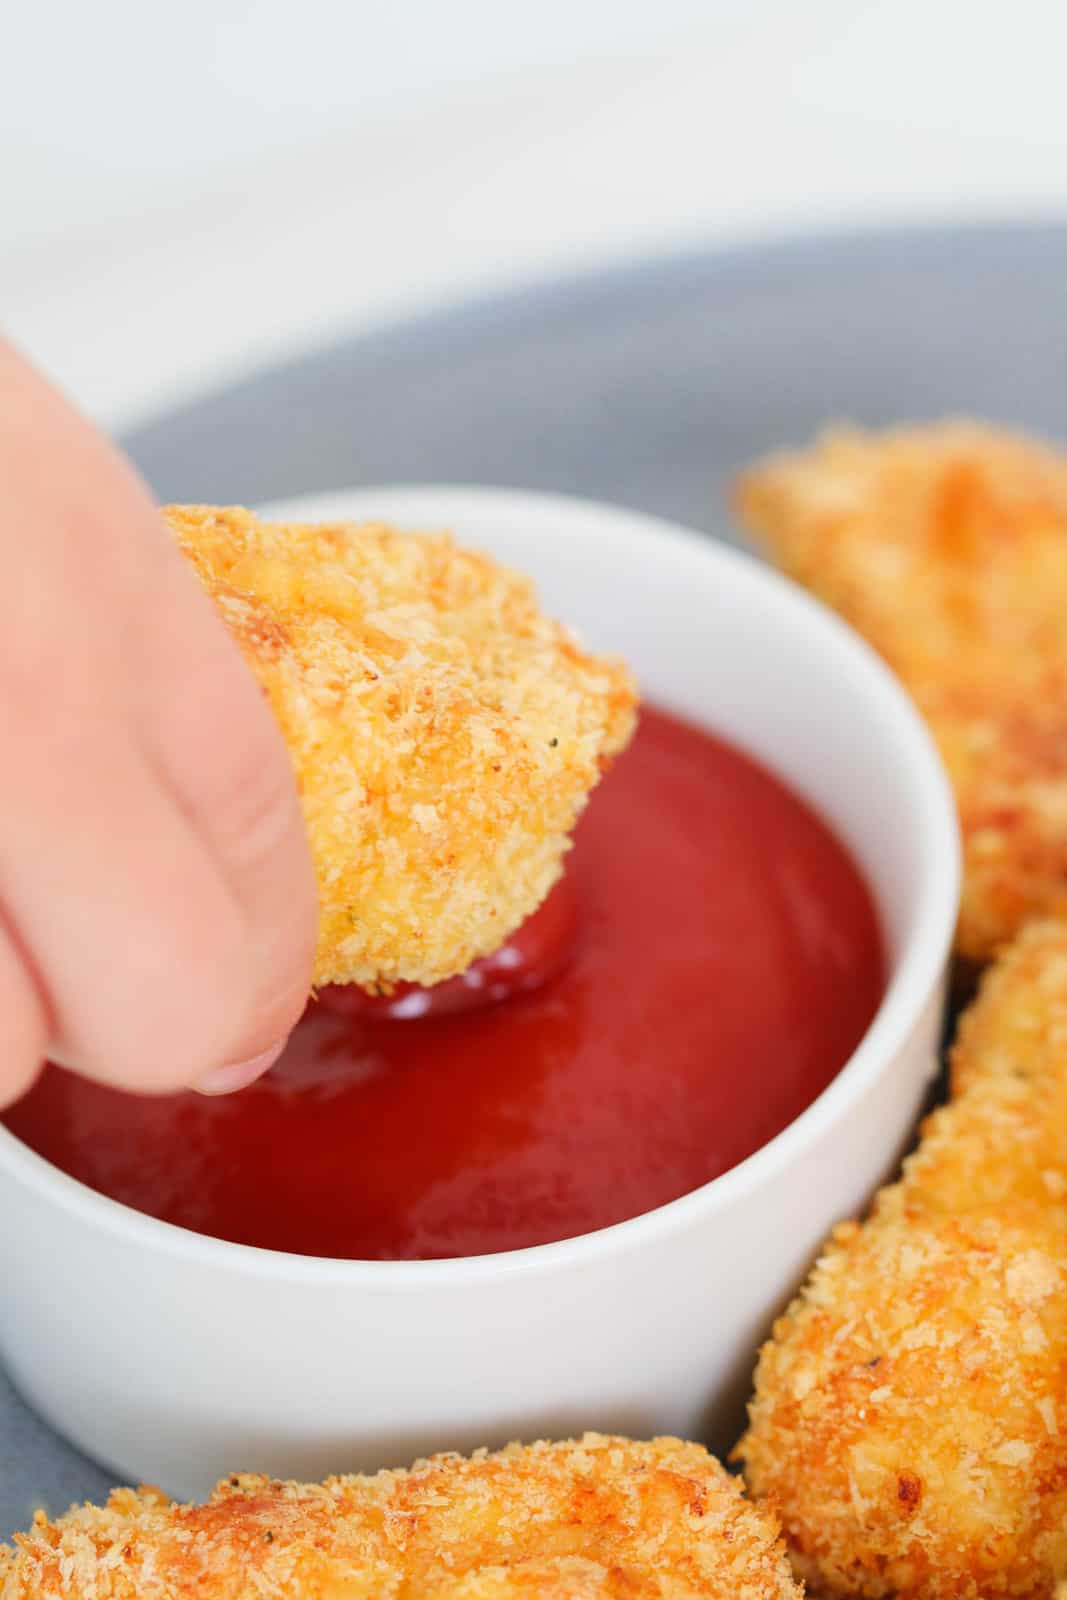 A hand dipping a crunchy crumbed homemade chicken nugget into a bowl of sauce.